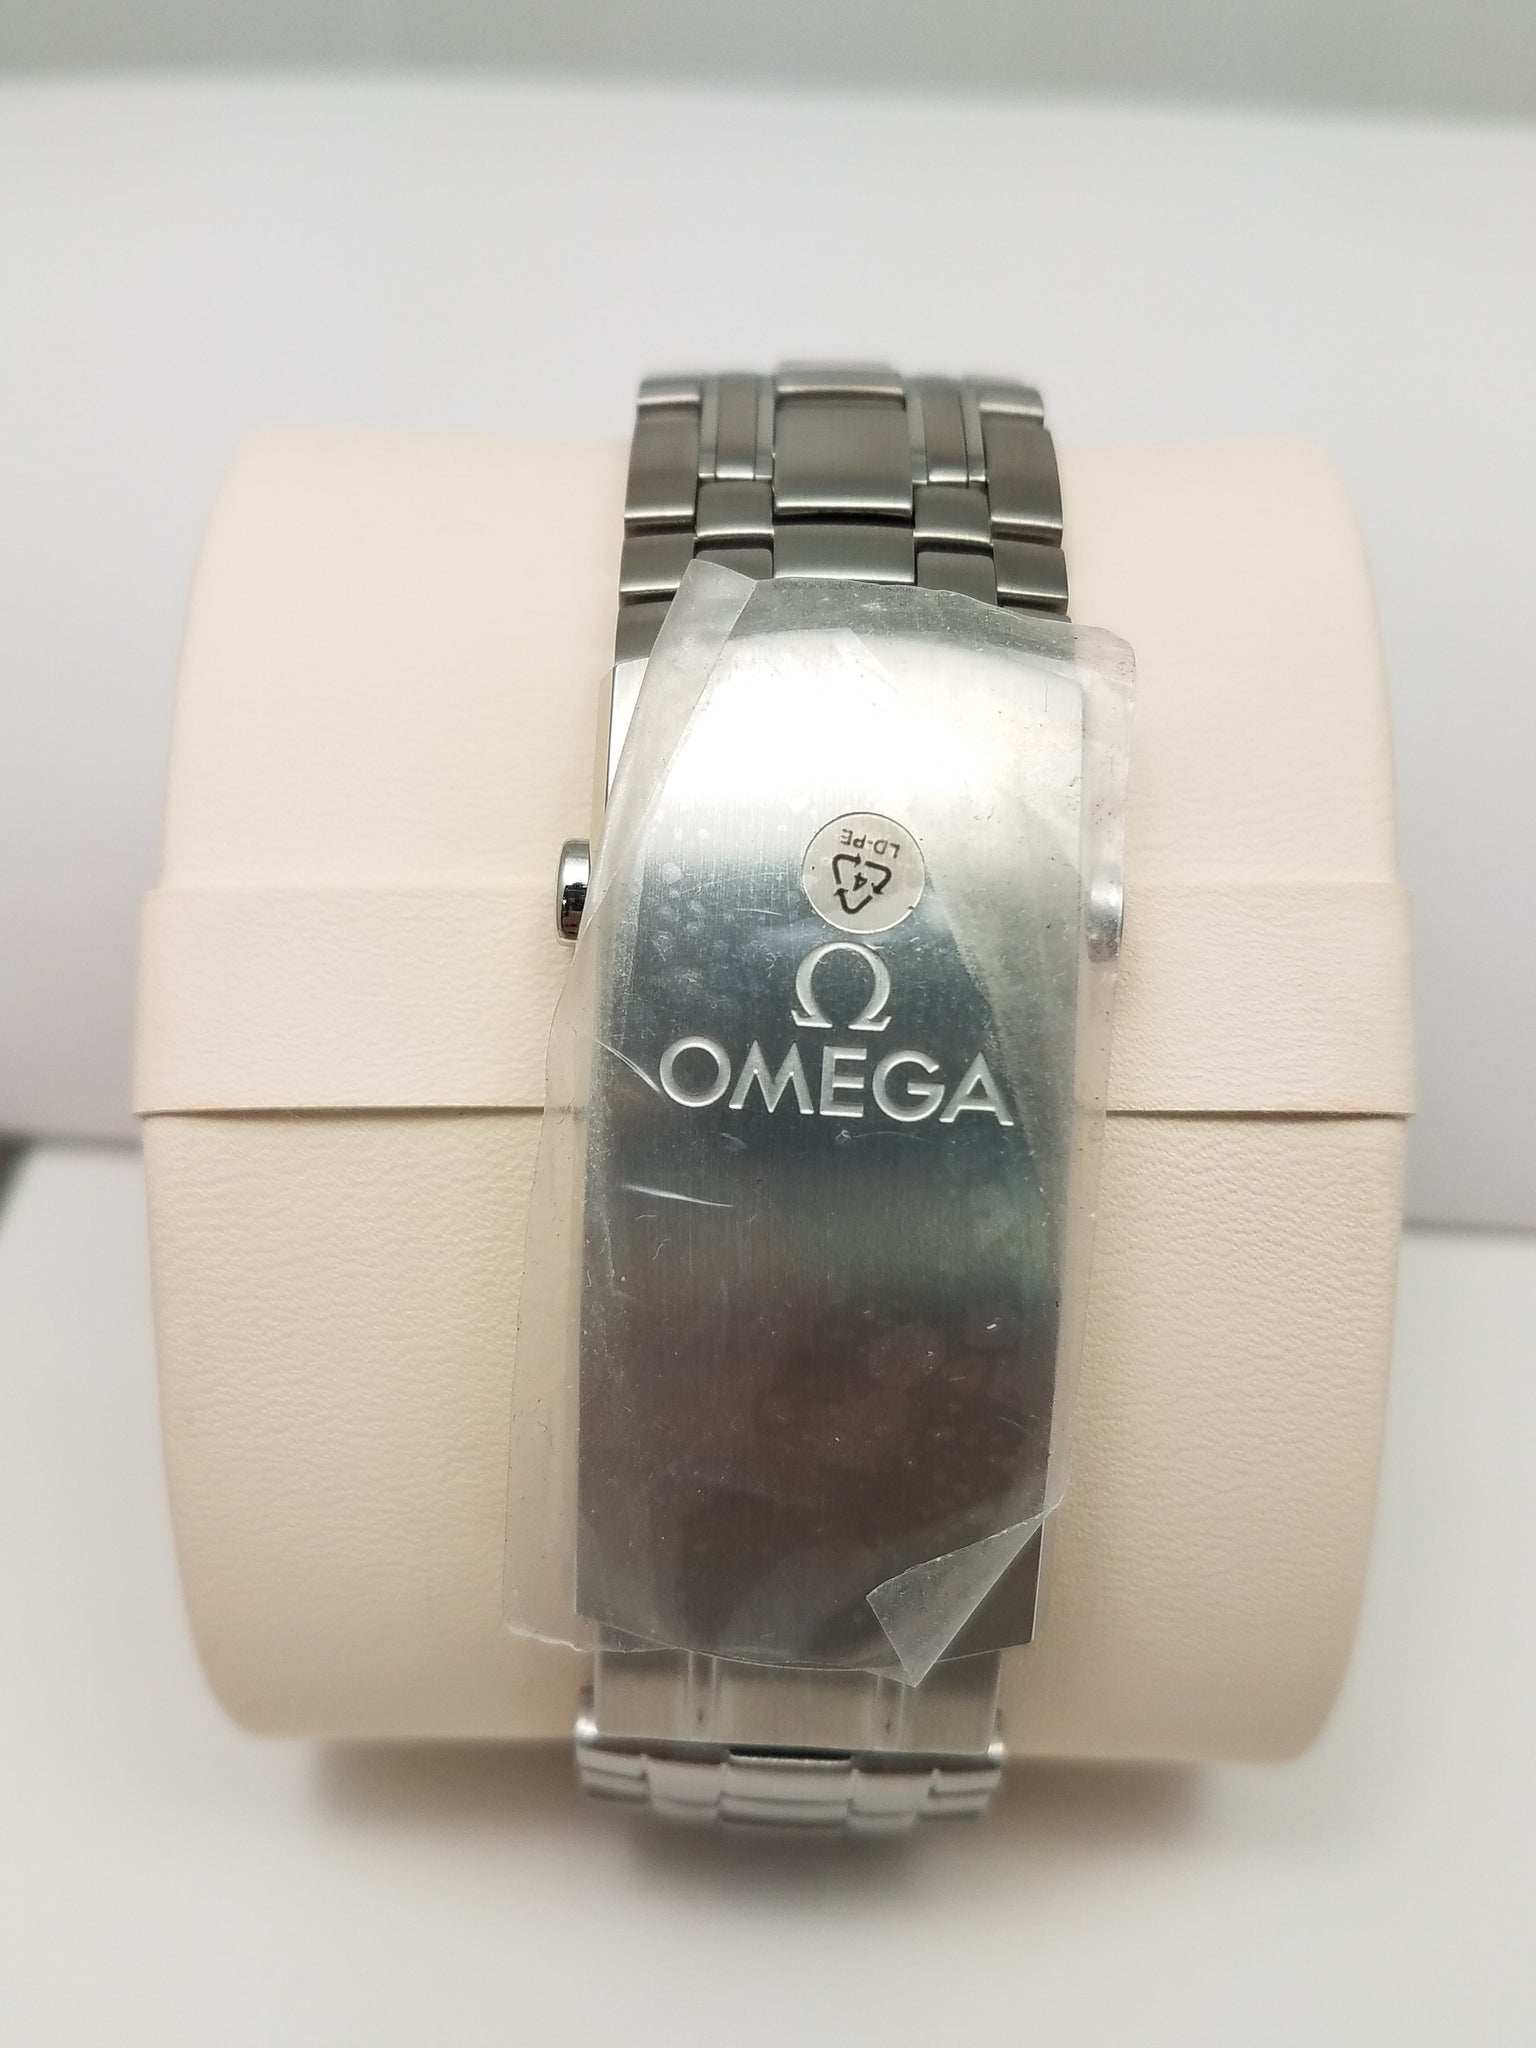 Omega Stainless 300m Chrono Diver Watch #21030445101001